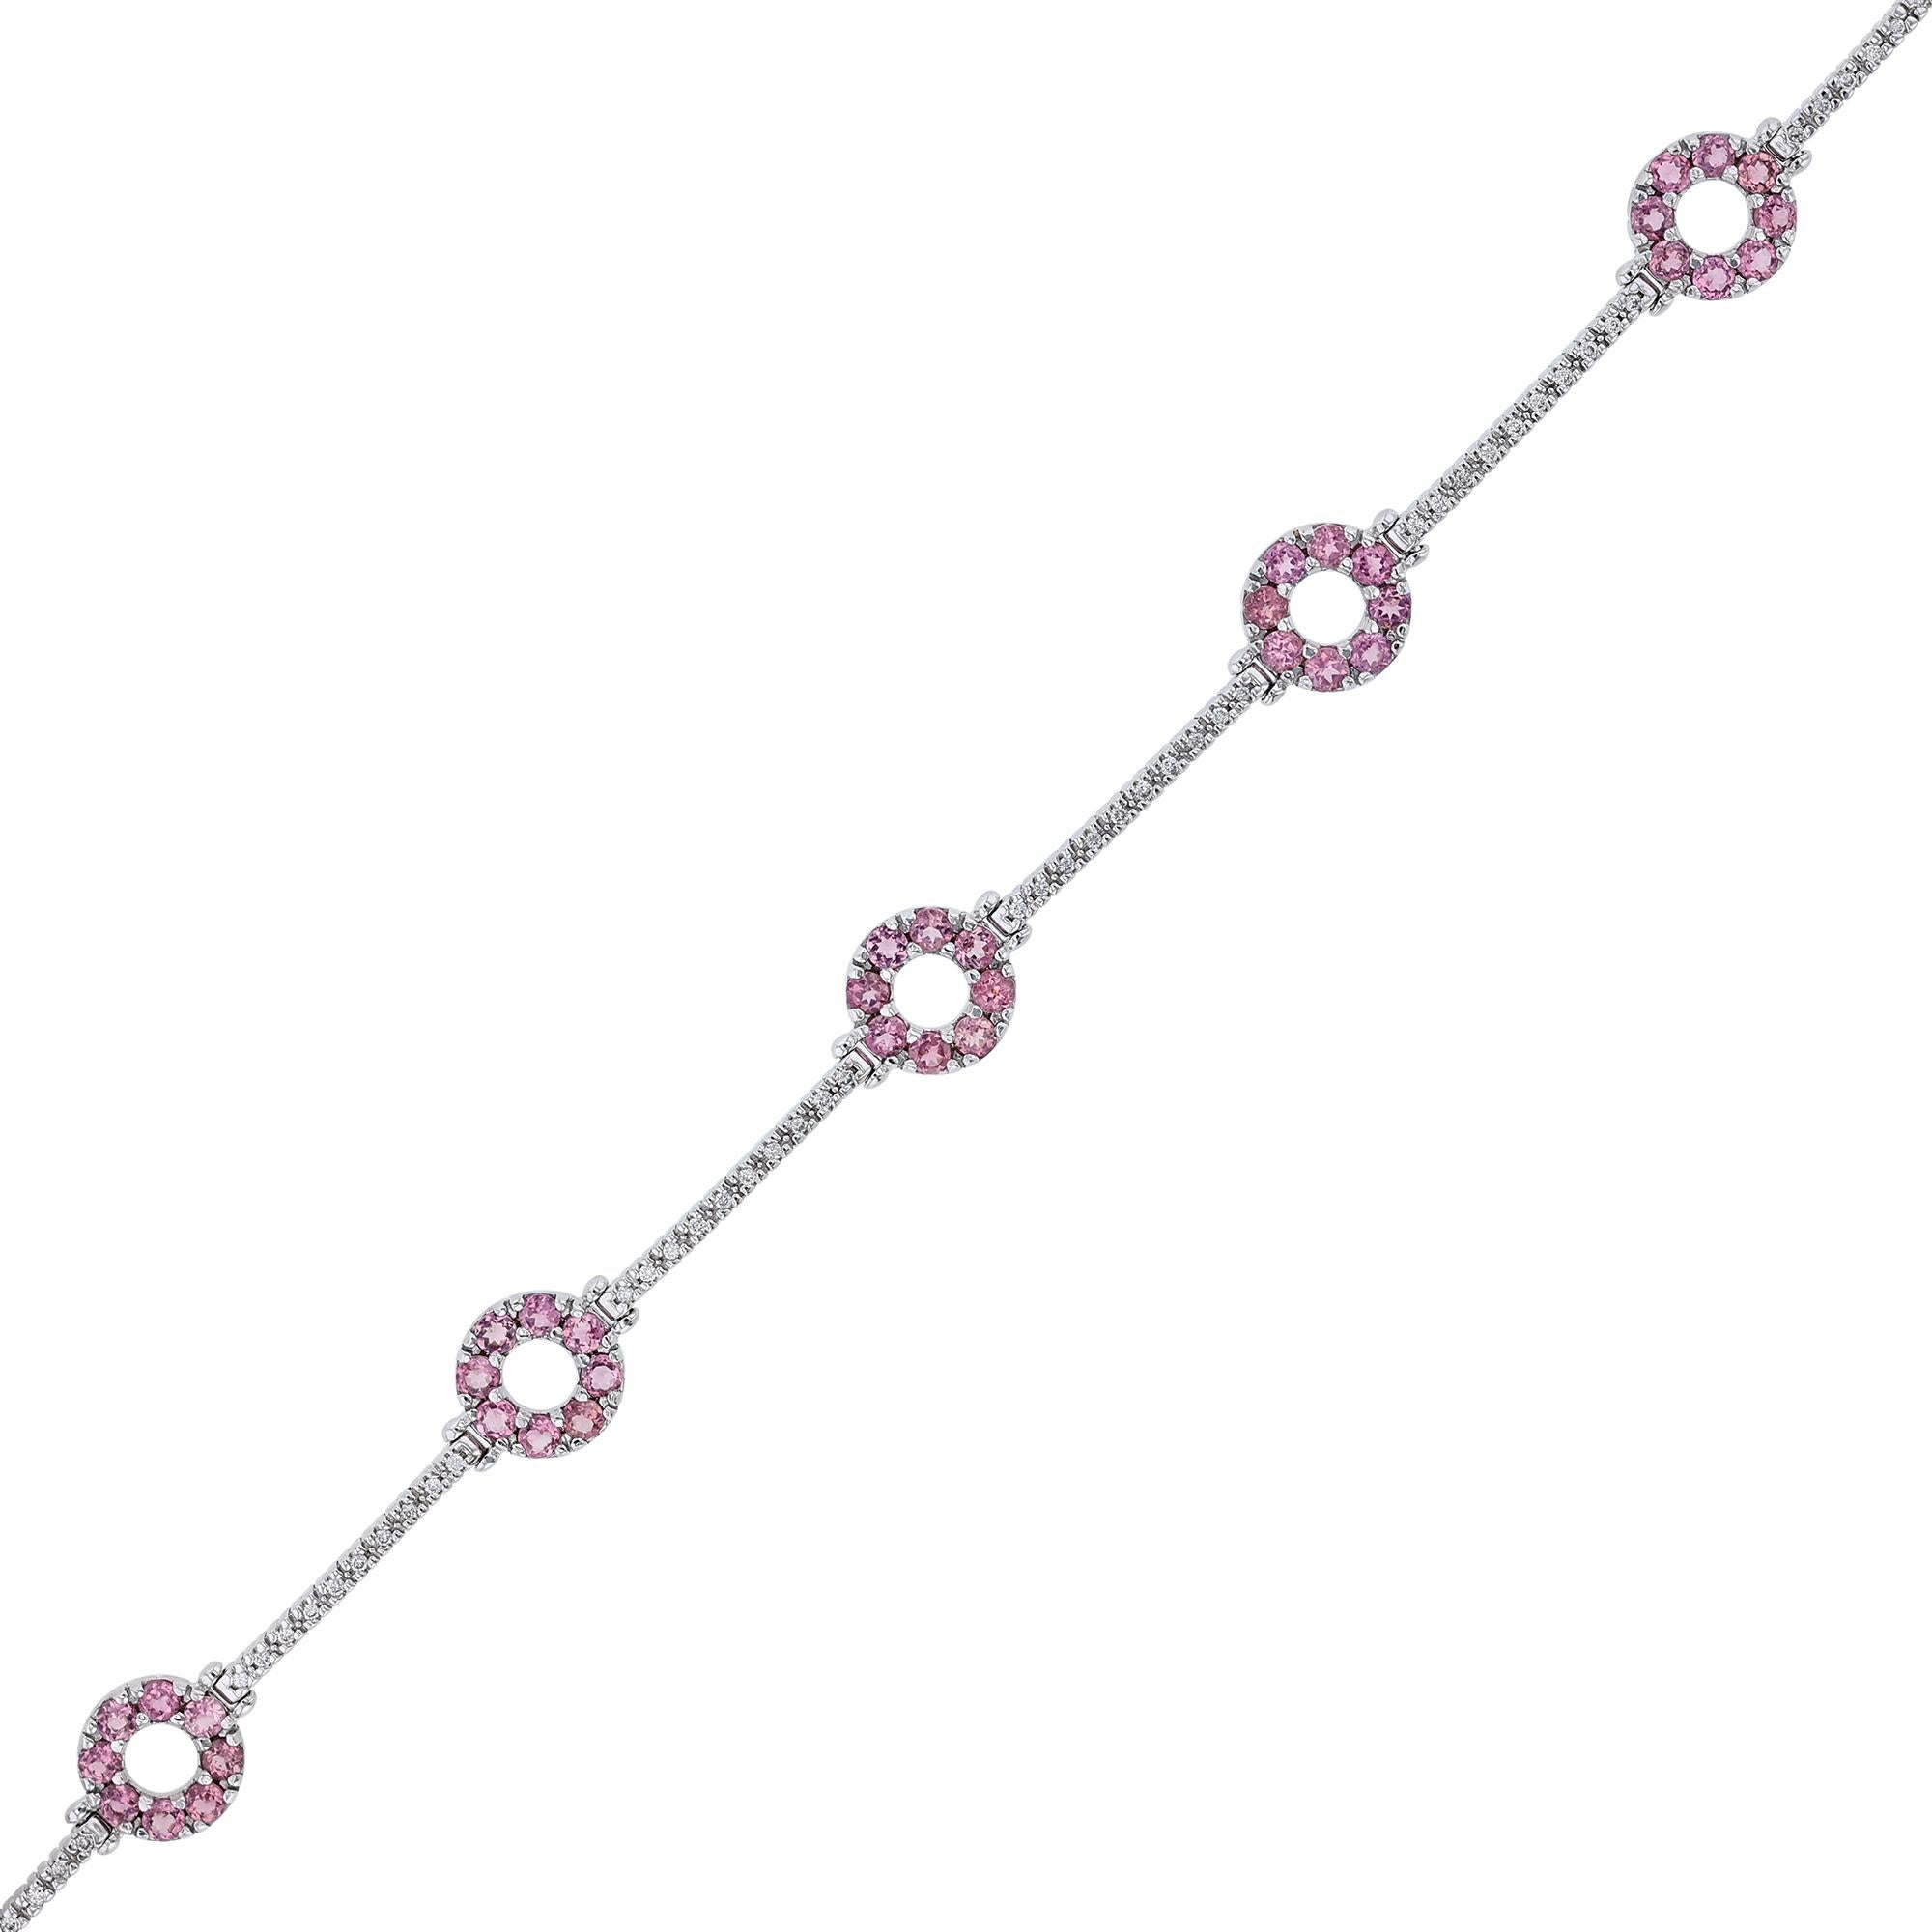 This bracelet is made in 14K white gold and features 52 round cut diamonds weighing 0.26 carats. With five round links of 40 pink tourmalines weighing 3.20 carats. All stones are prong set.